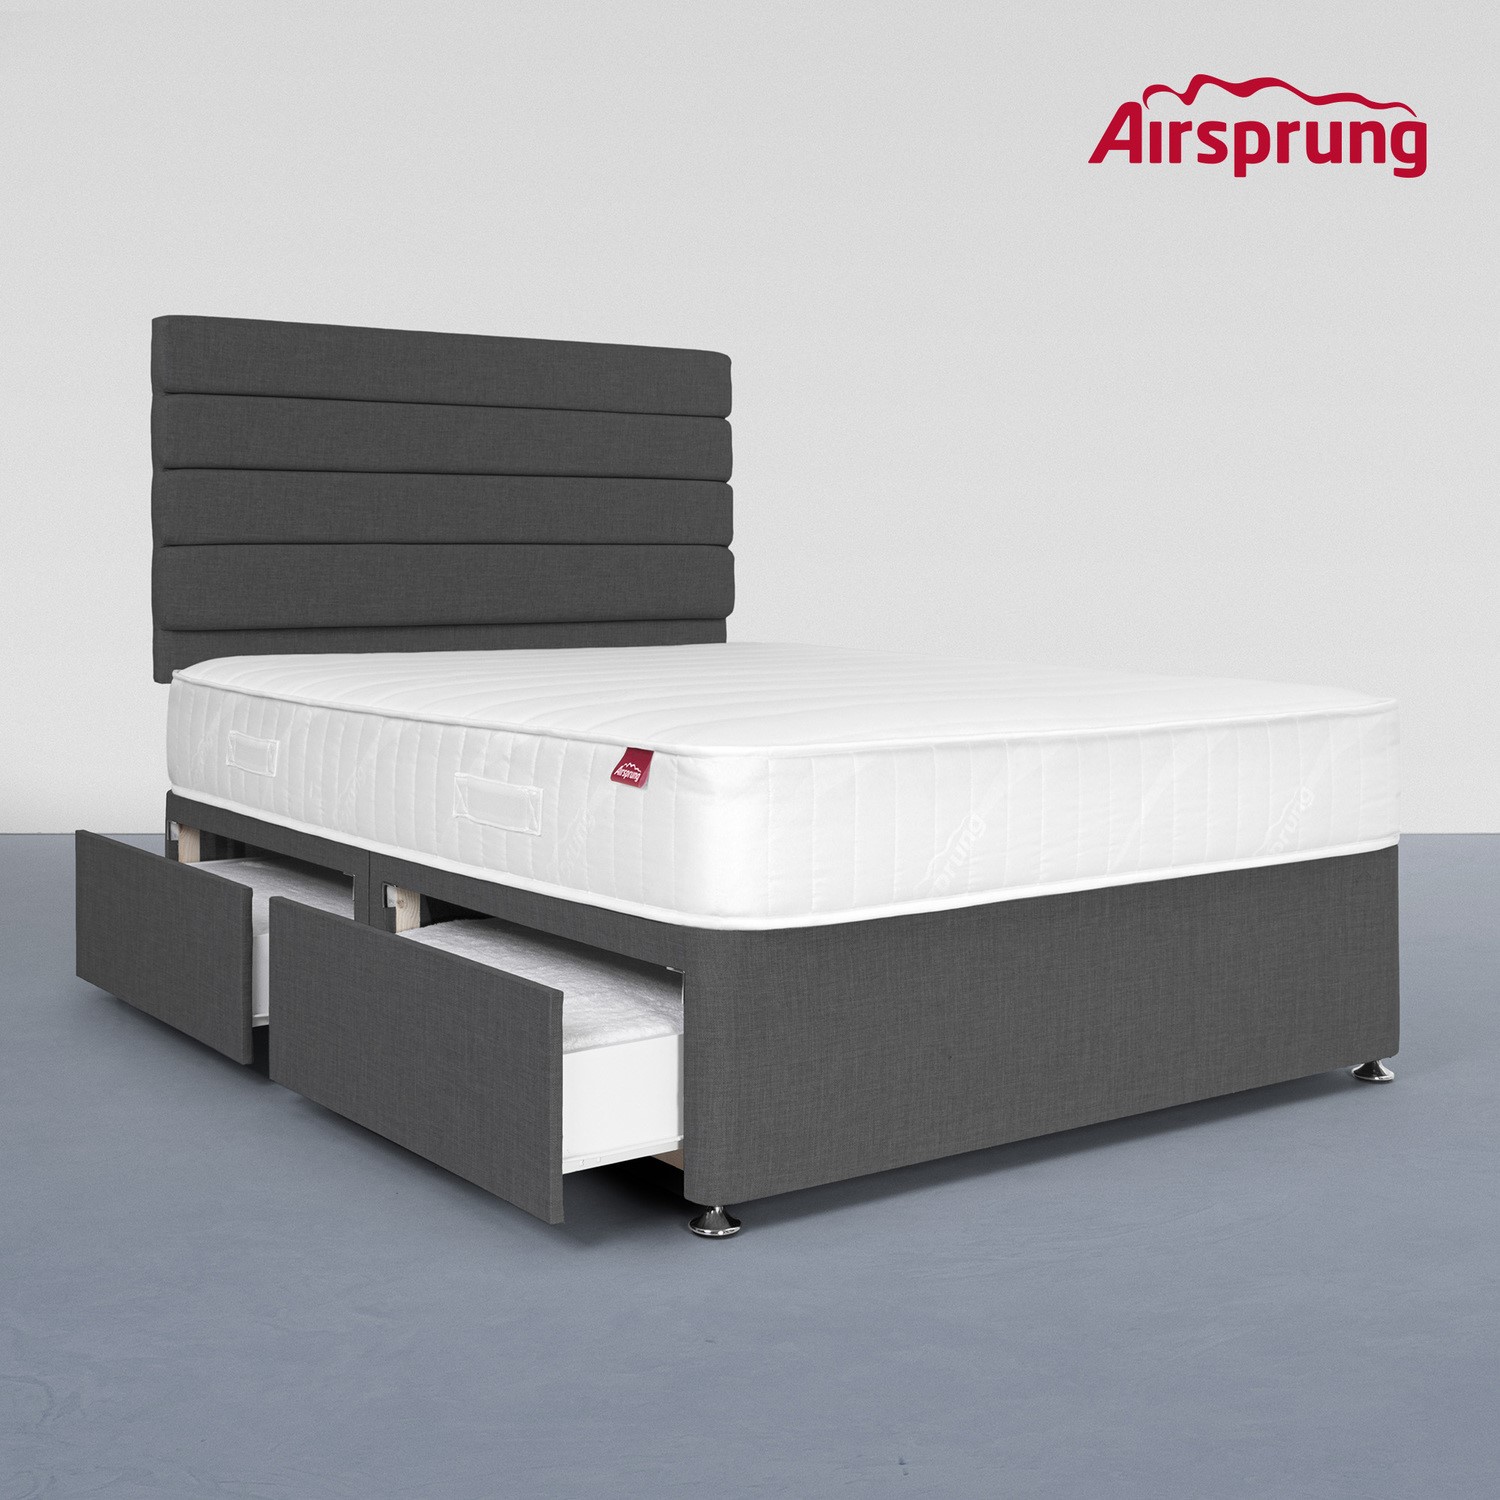 Read more about Airsprung double 4 drawer divan bed with comfort mattress charcoal